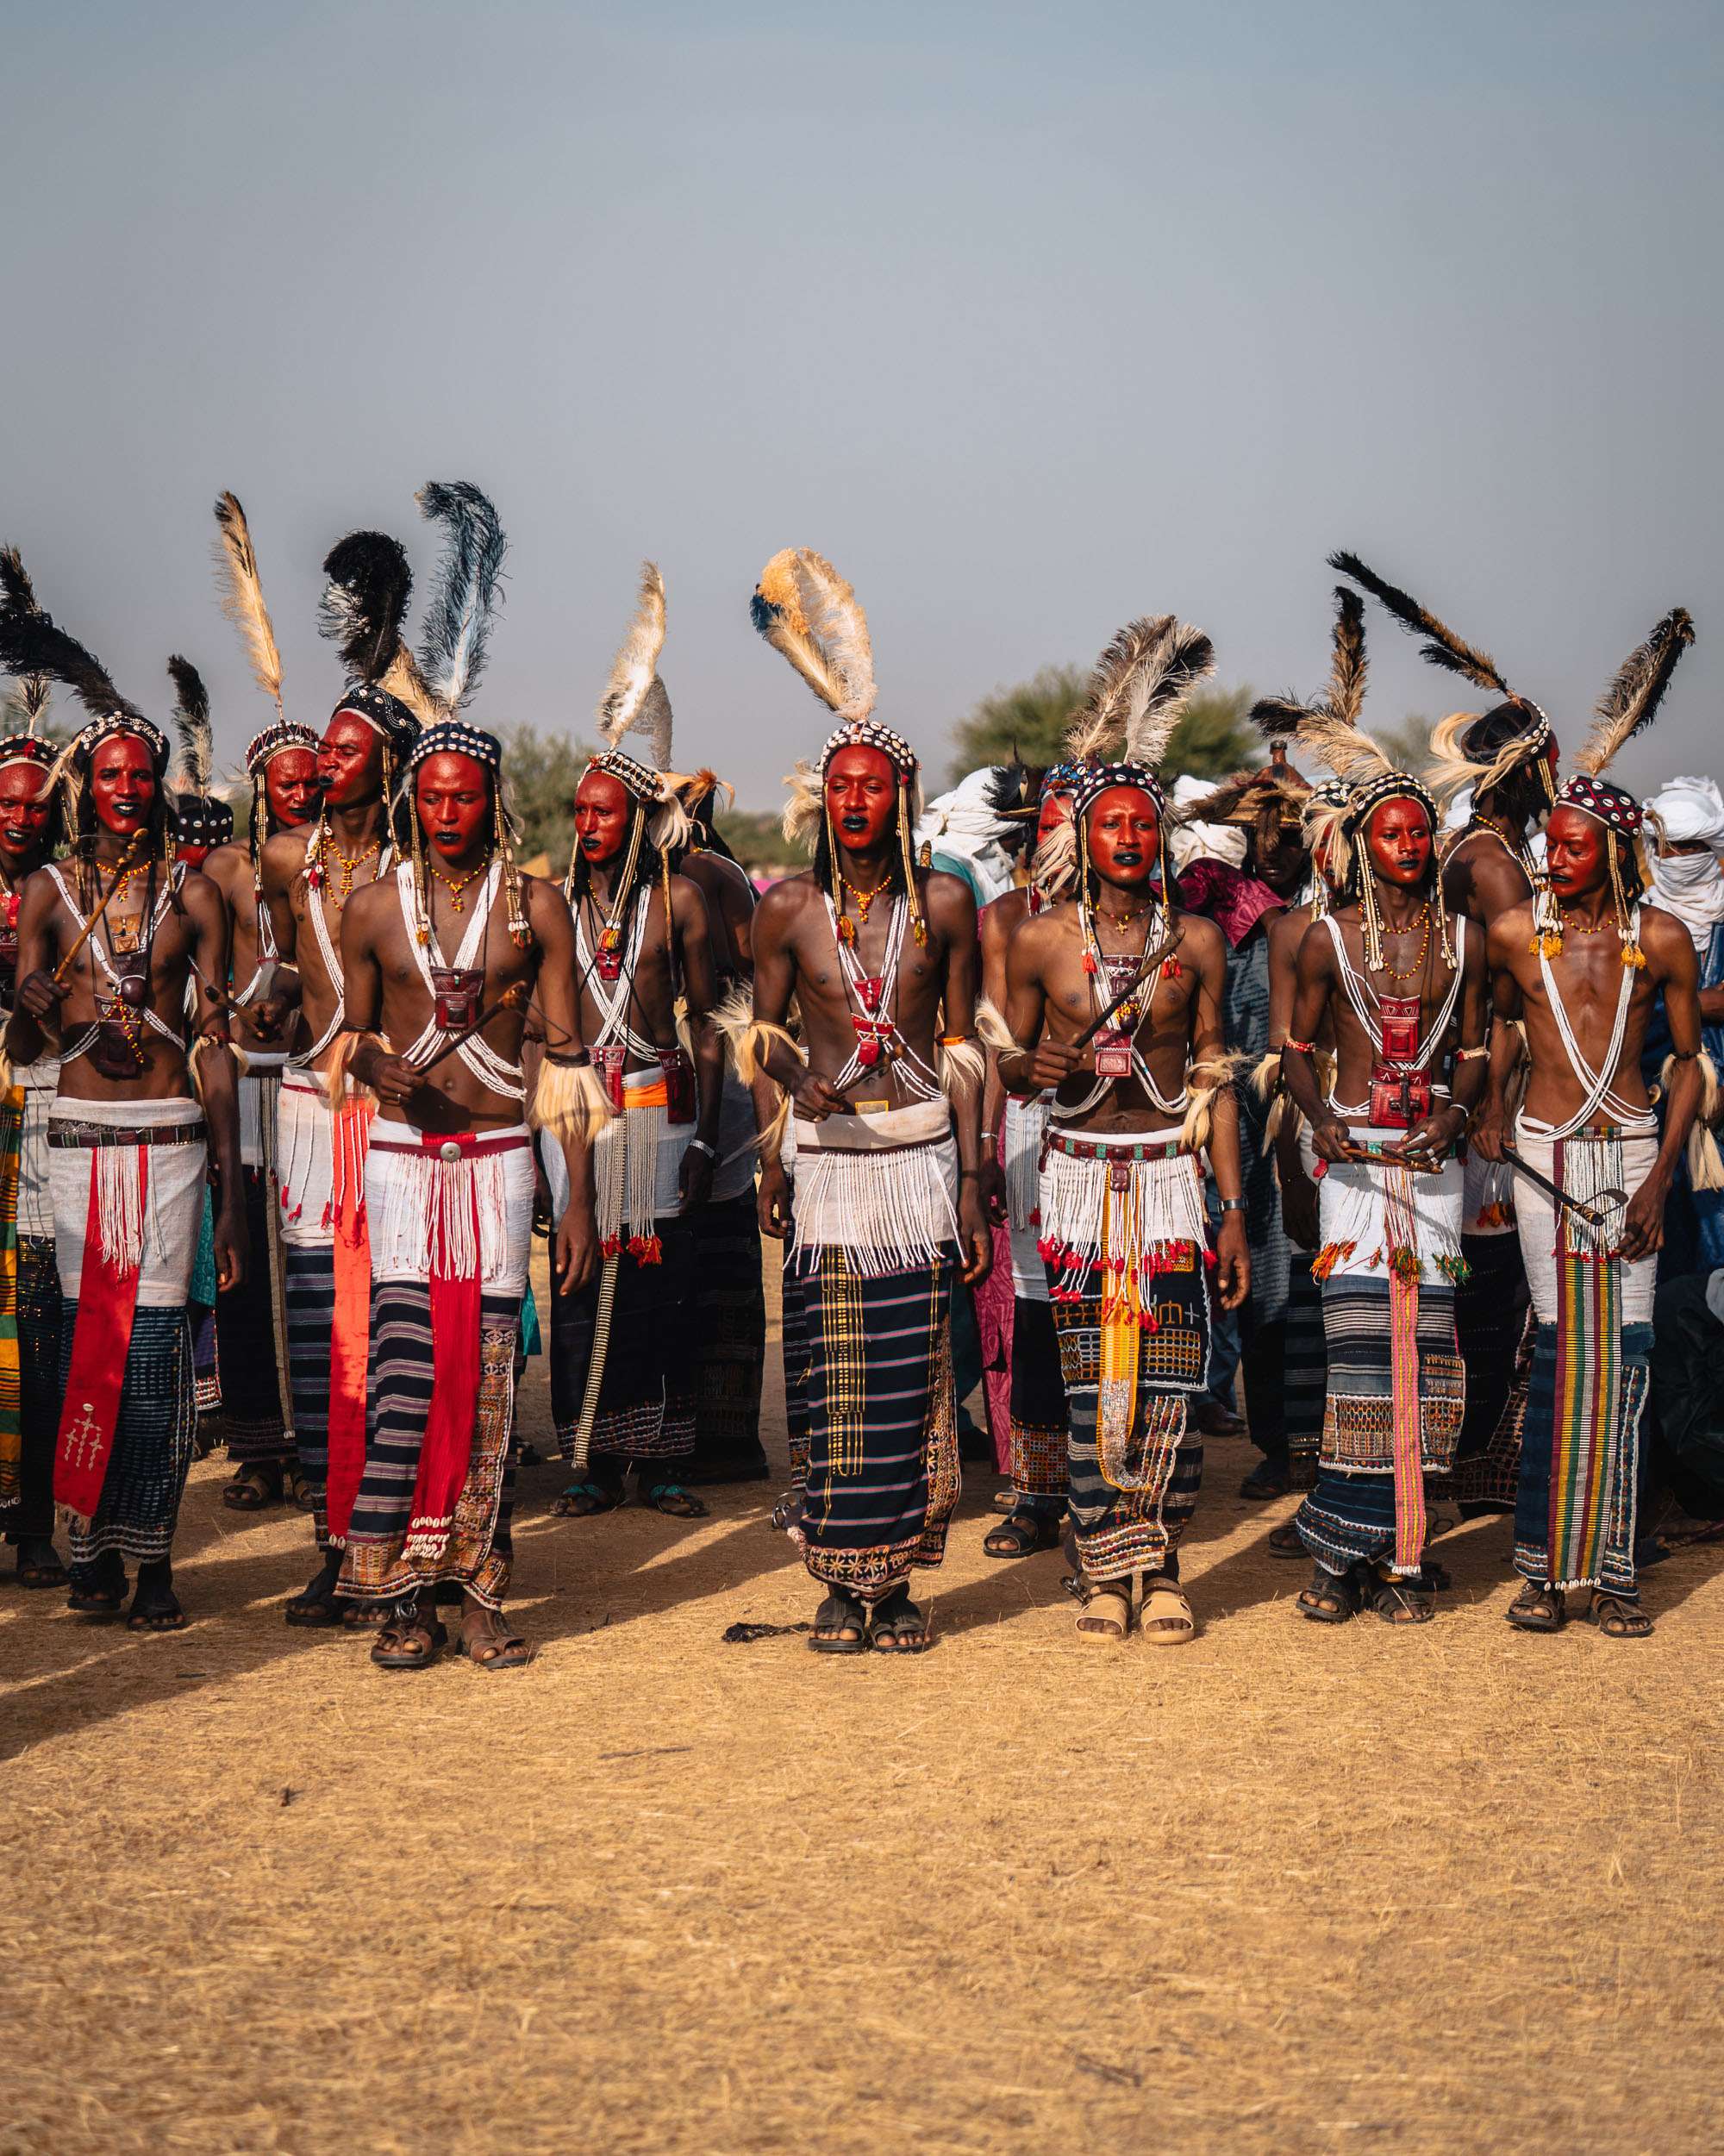 Read more about the article RED-Y TO MARRY: Stunning Courtship Ritual In Sahara Where Painted Men Compete To Attract A Partner